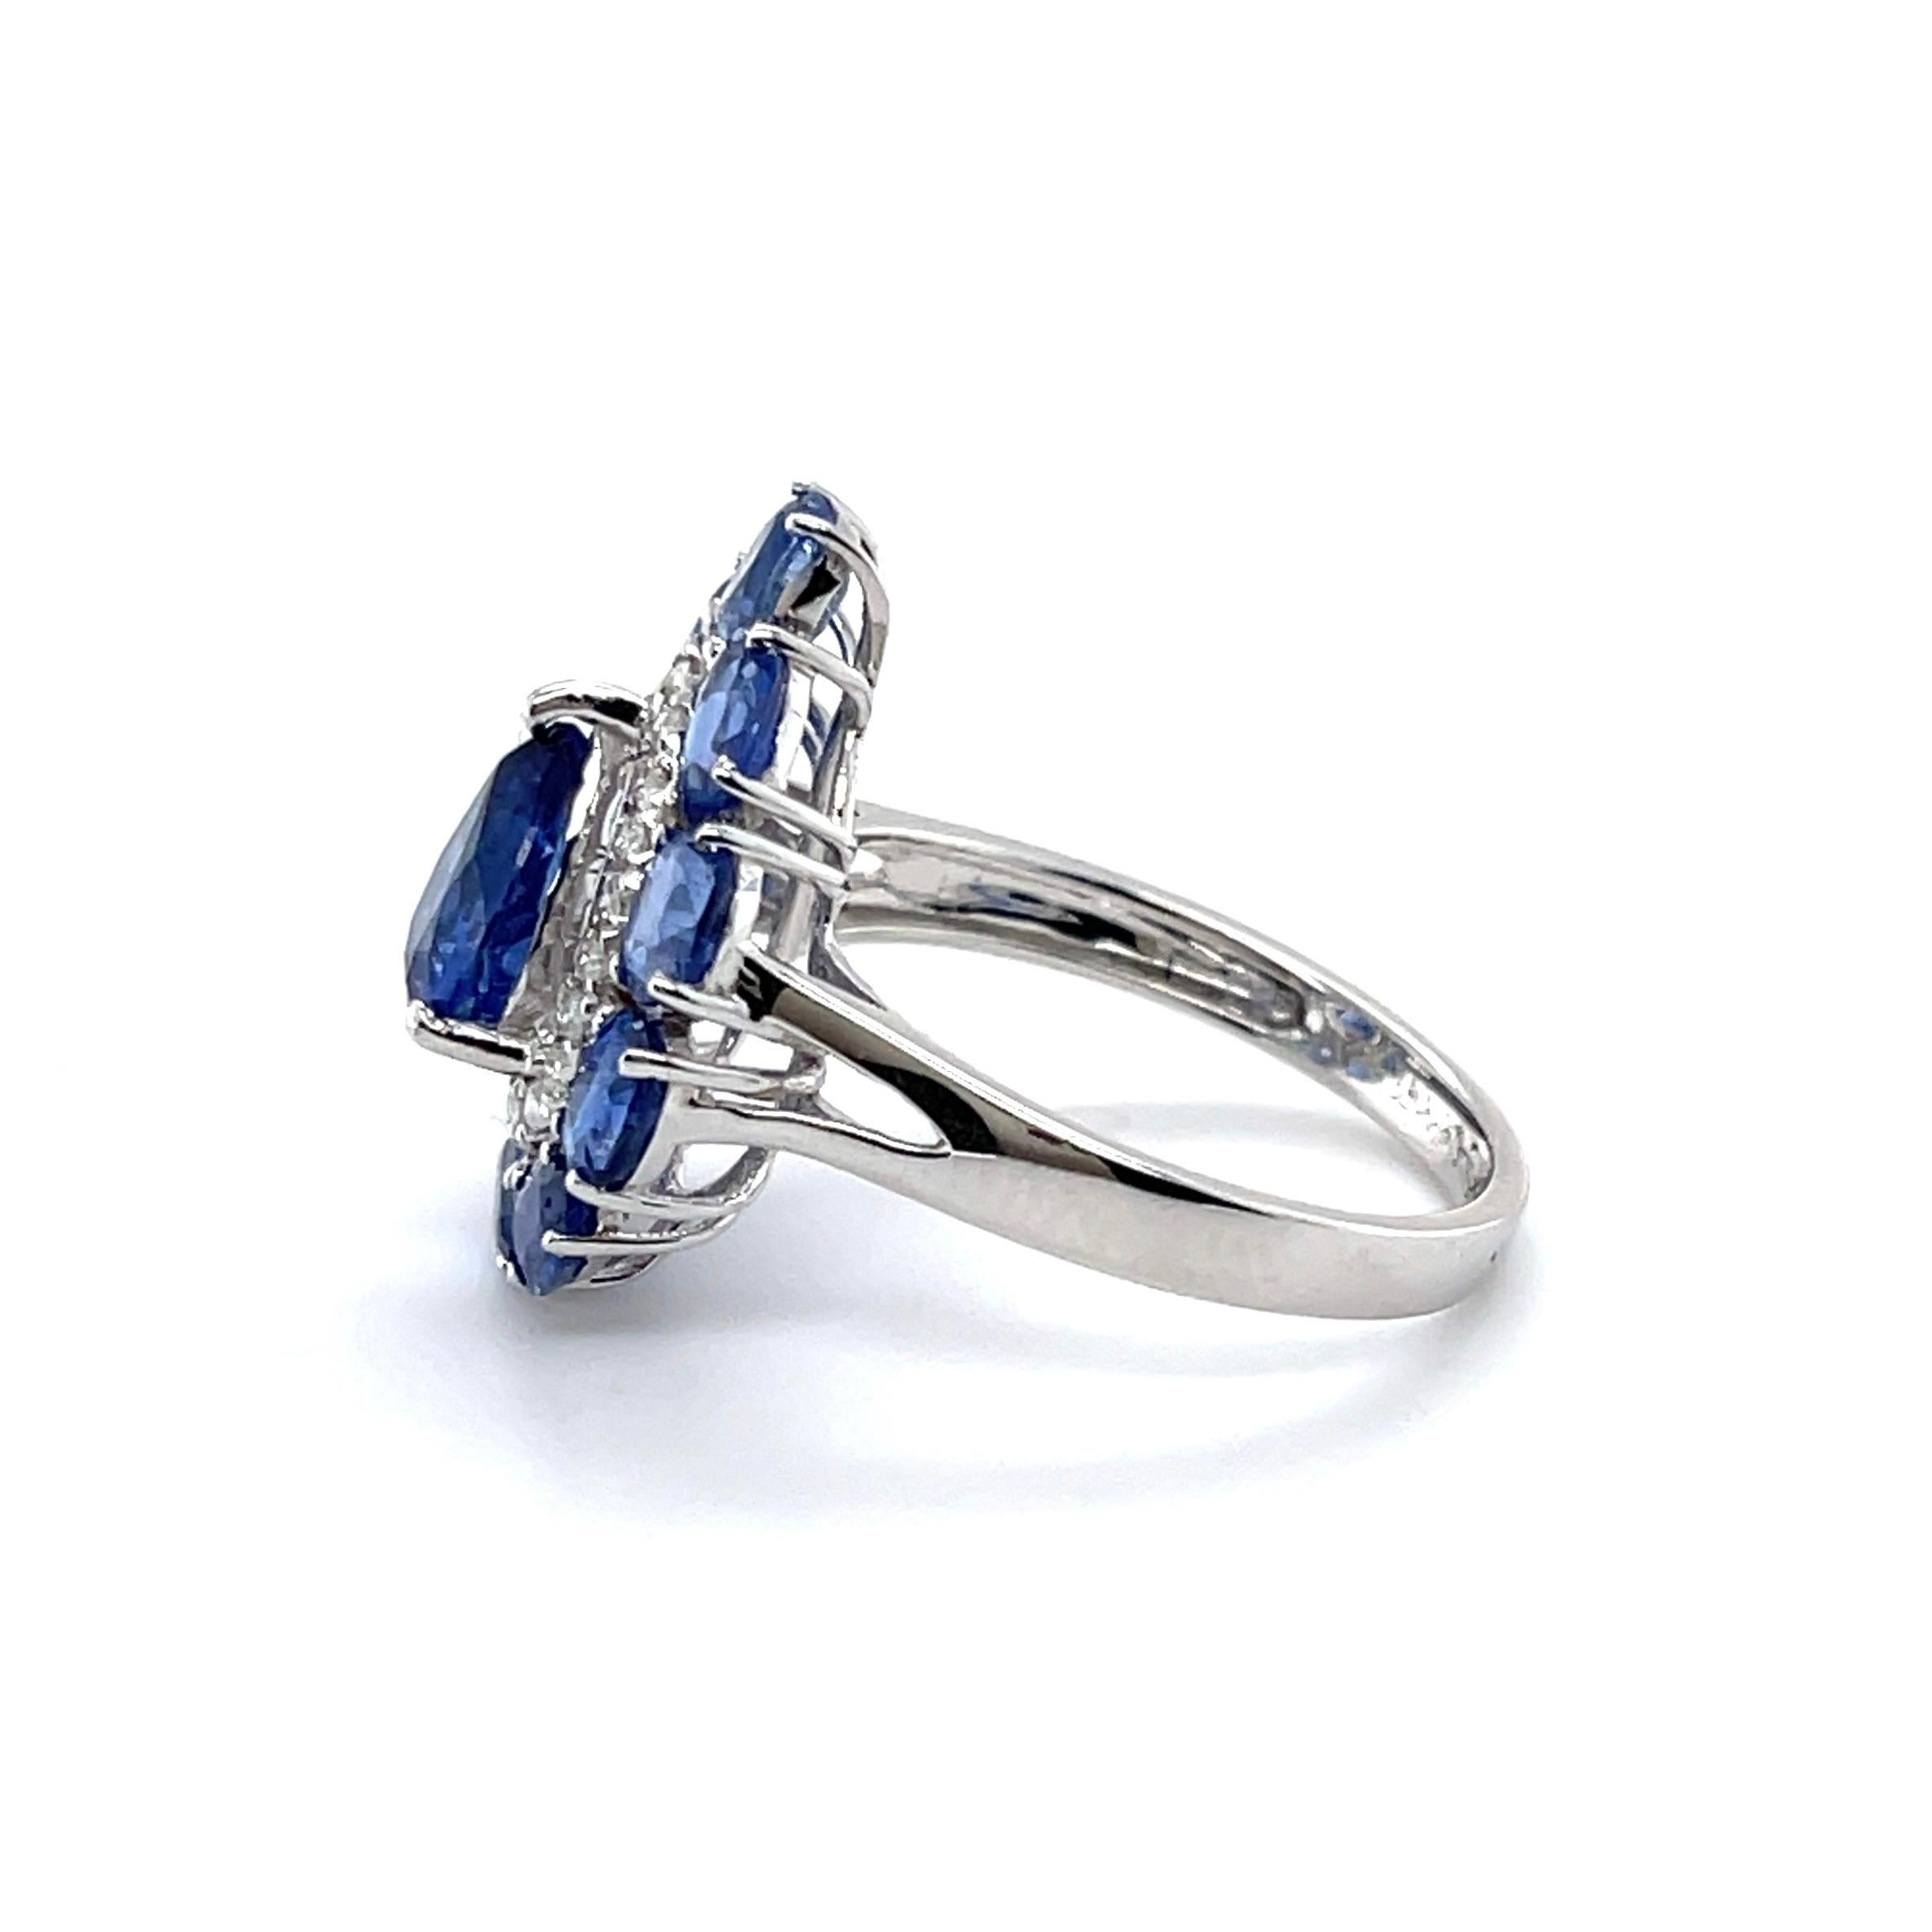 For Sale:  18ct White Gold Ring with 1.48ct Kyanite and Diamond 3